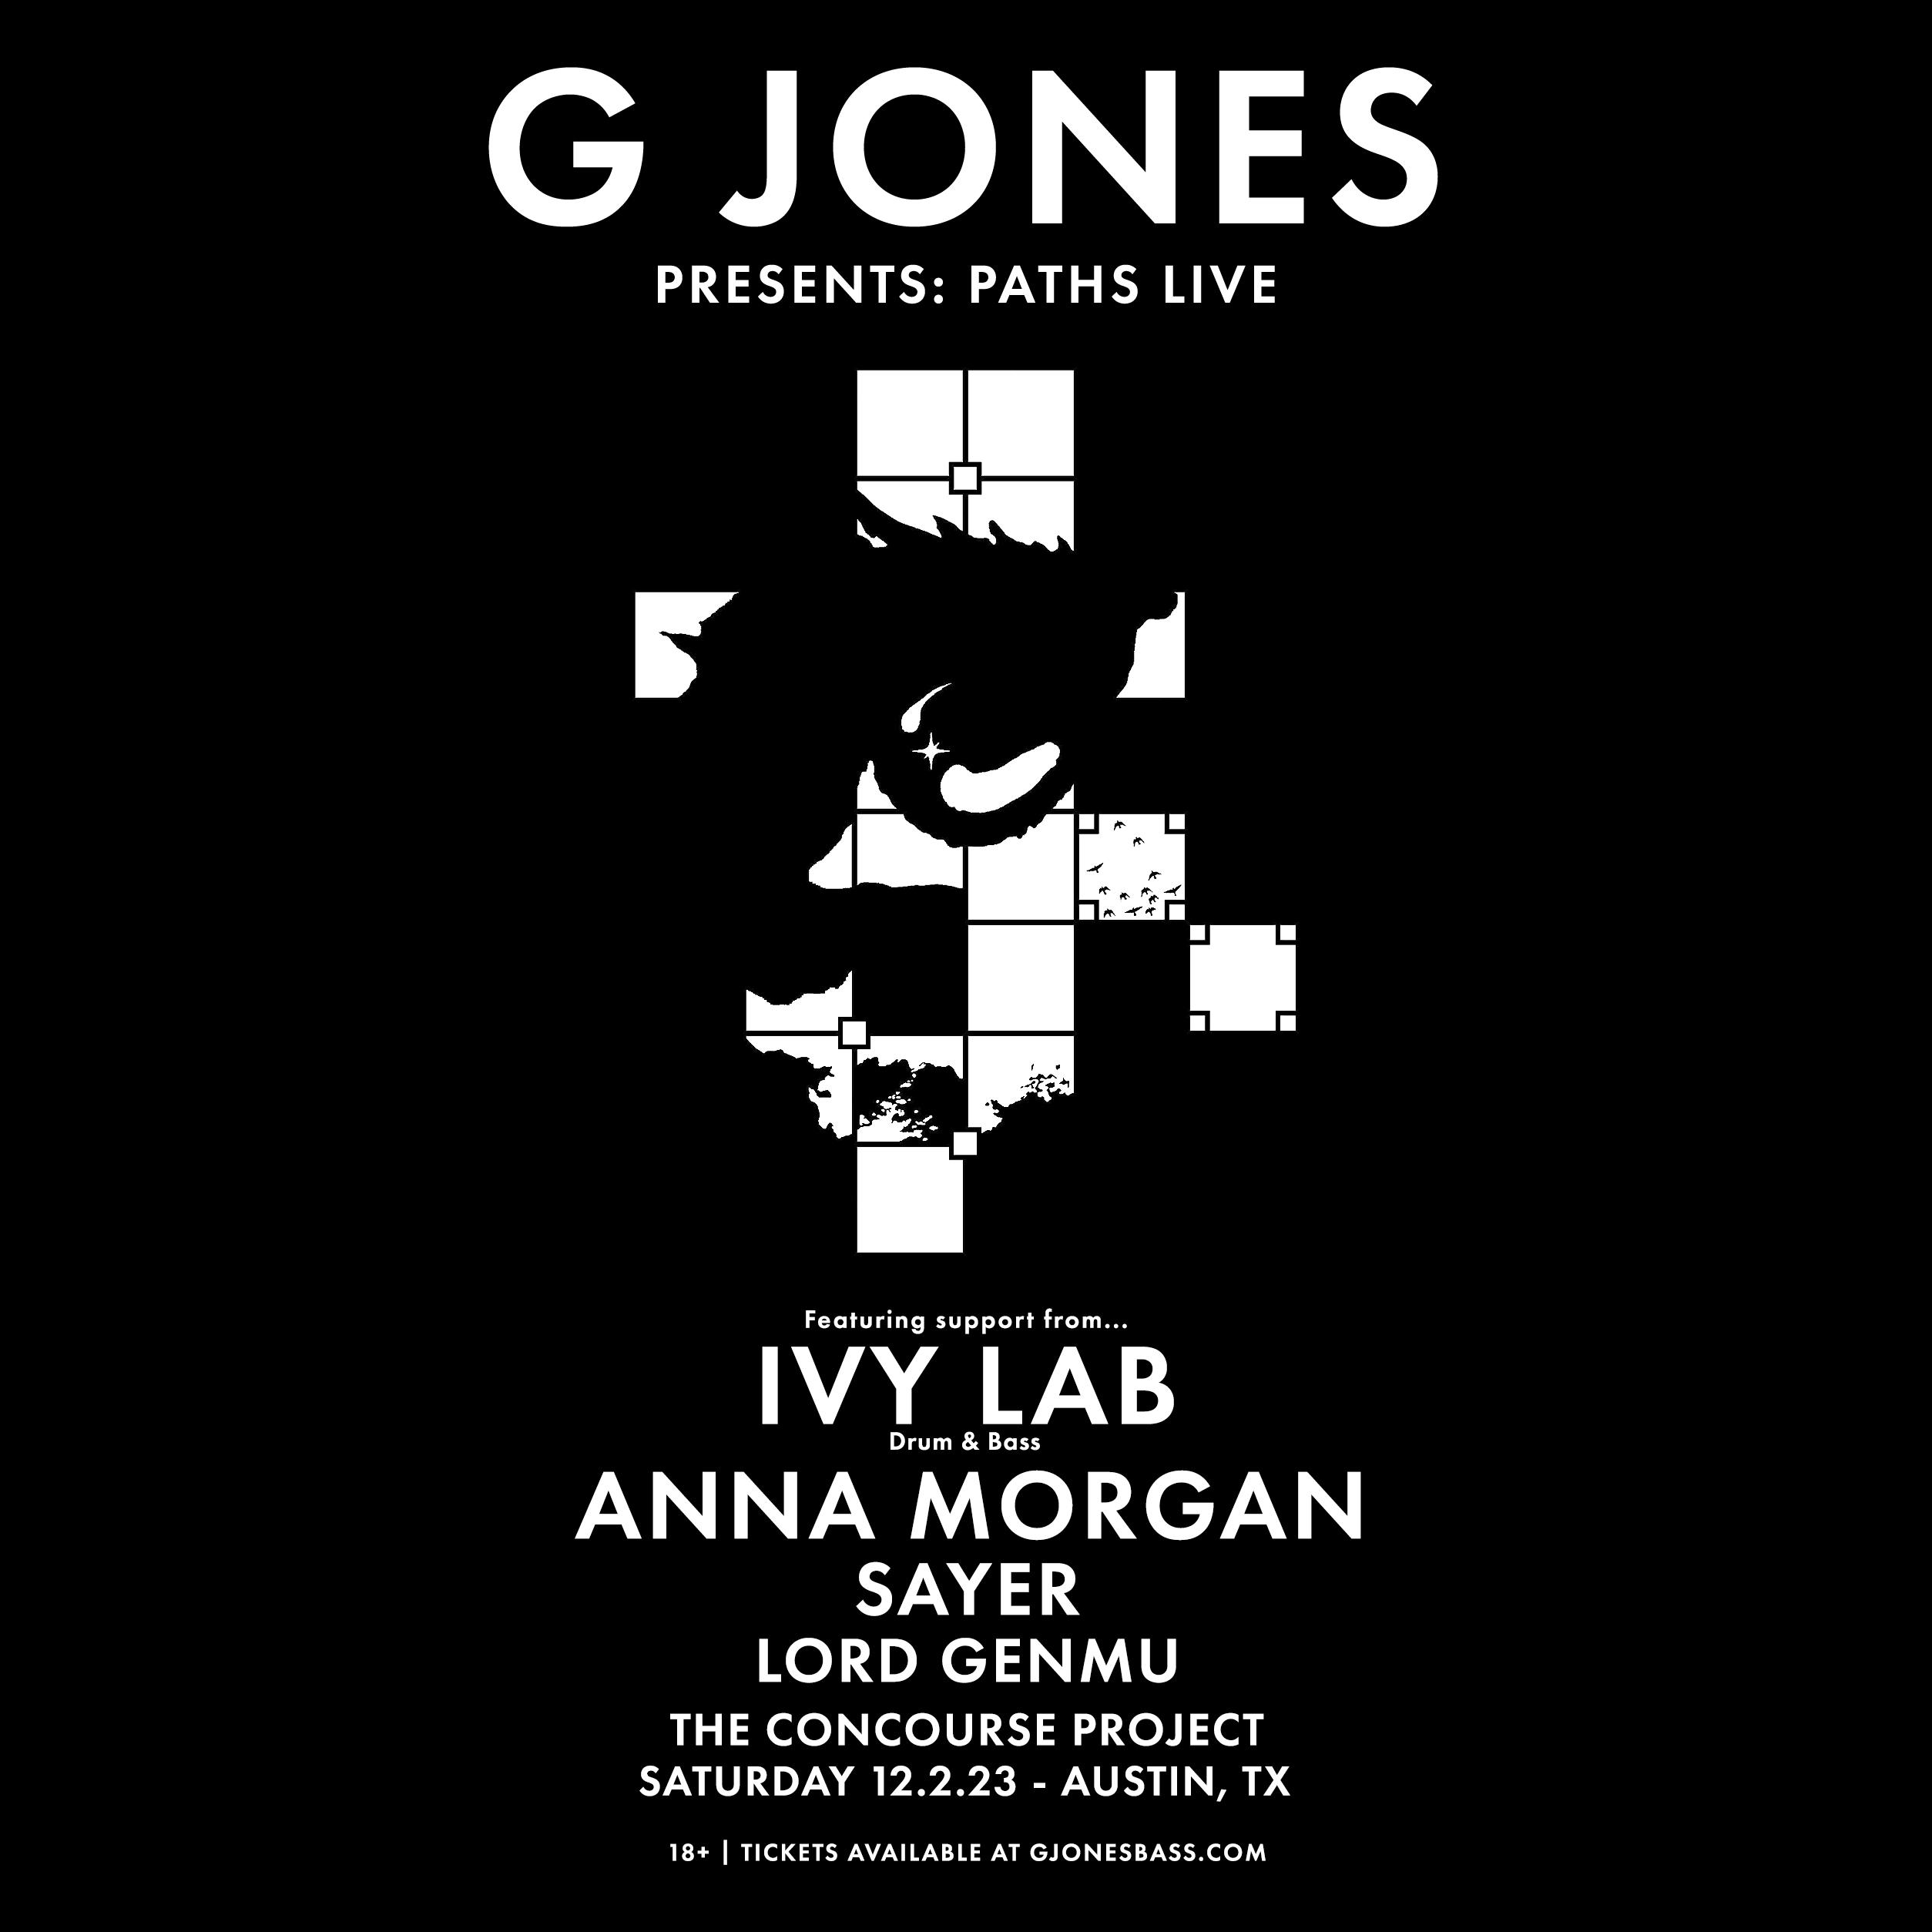 G Jones w/ Ivy Lab + More at The Concourse Project